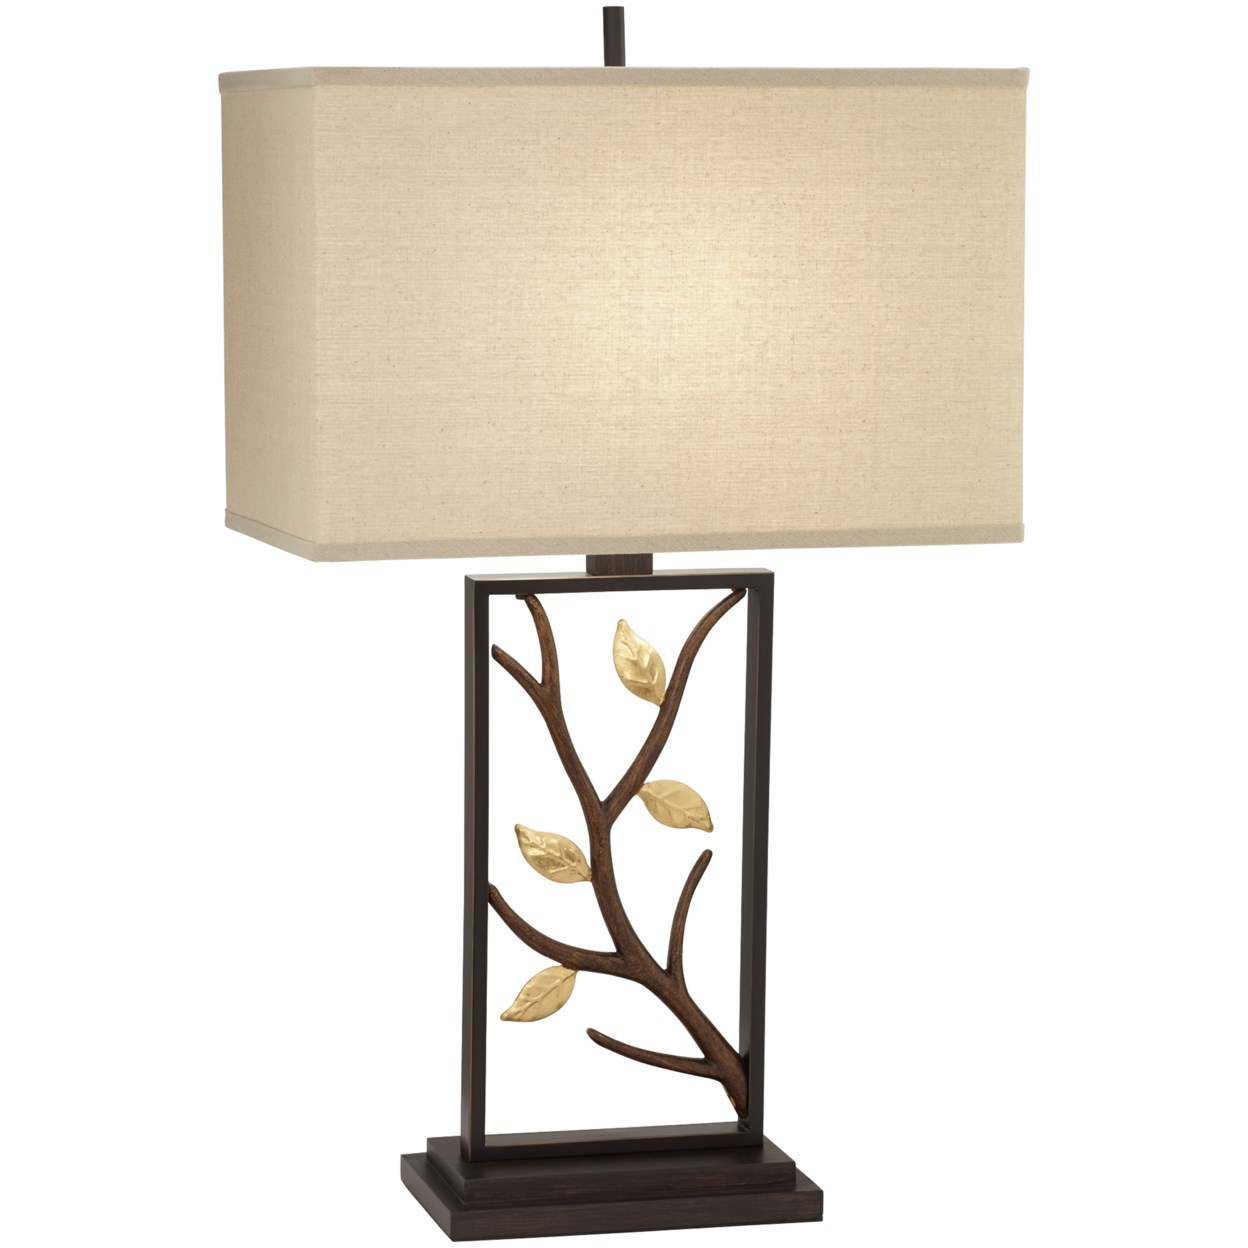 Pacific Coast Lighting Table Lamps Metal Table Lamp